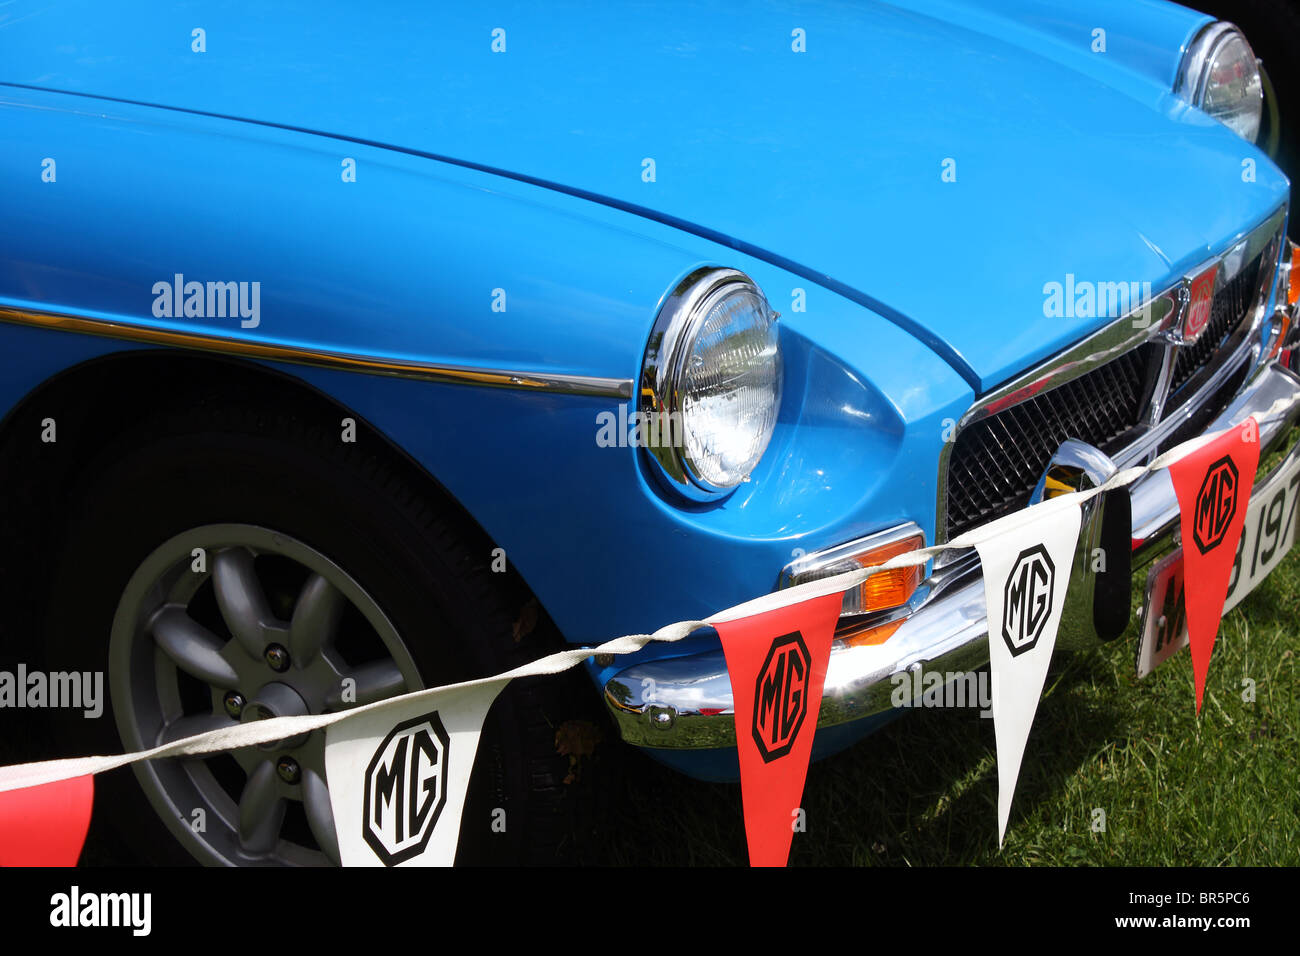 The front bumper, bonnet, grill and wheels of an MG Midget sports classic car. Stock Photo